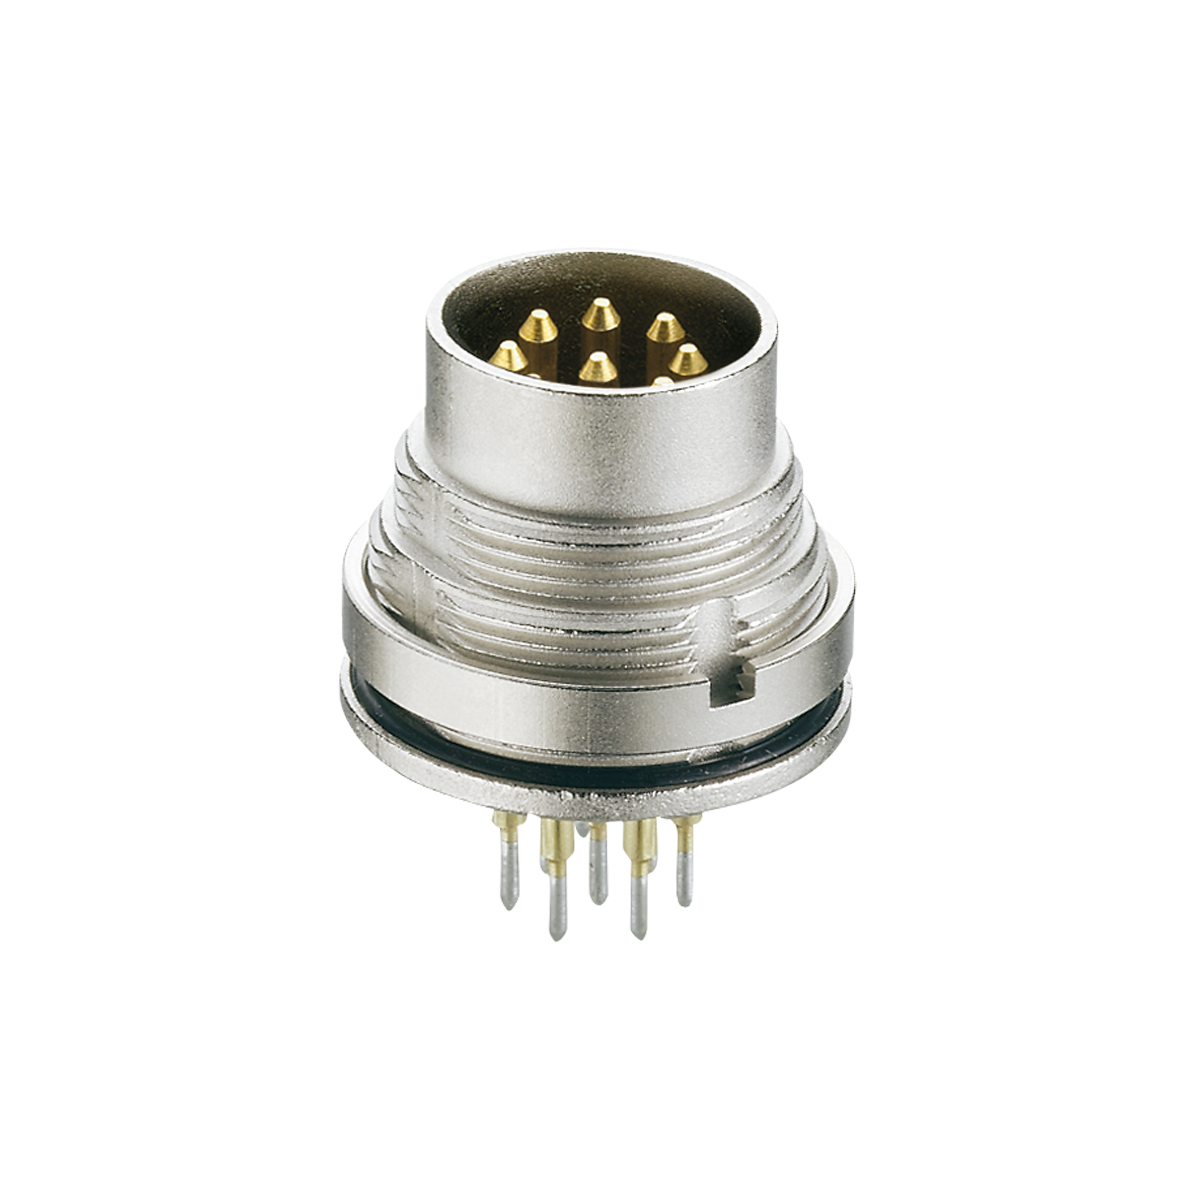 Lumberg: 0317-2 (Series 03 | Circular connectors with threaded joint M16 acc. to IEC 61076-2-106, IP40/IP68)